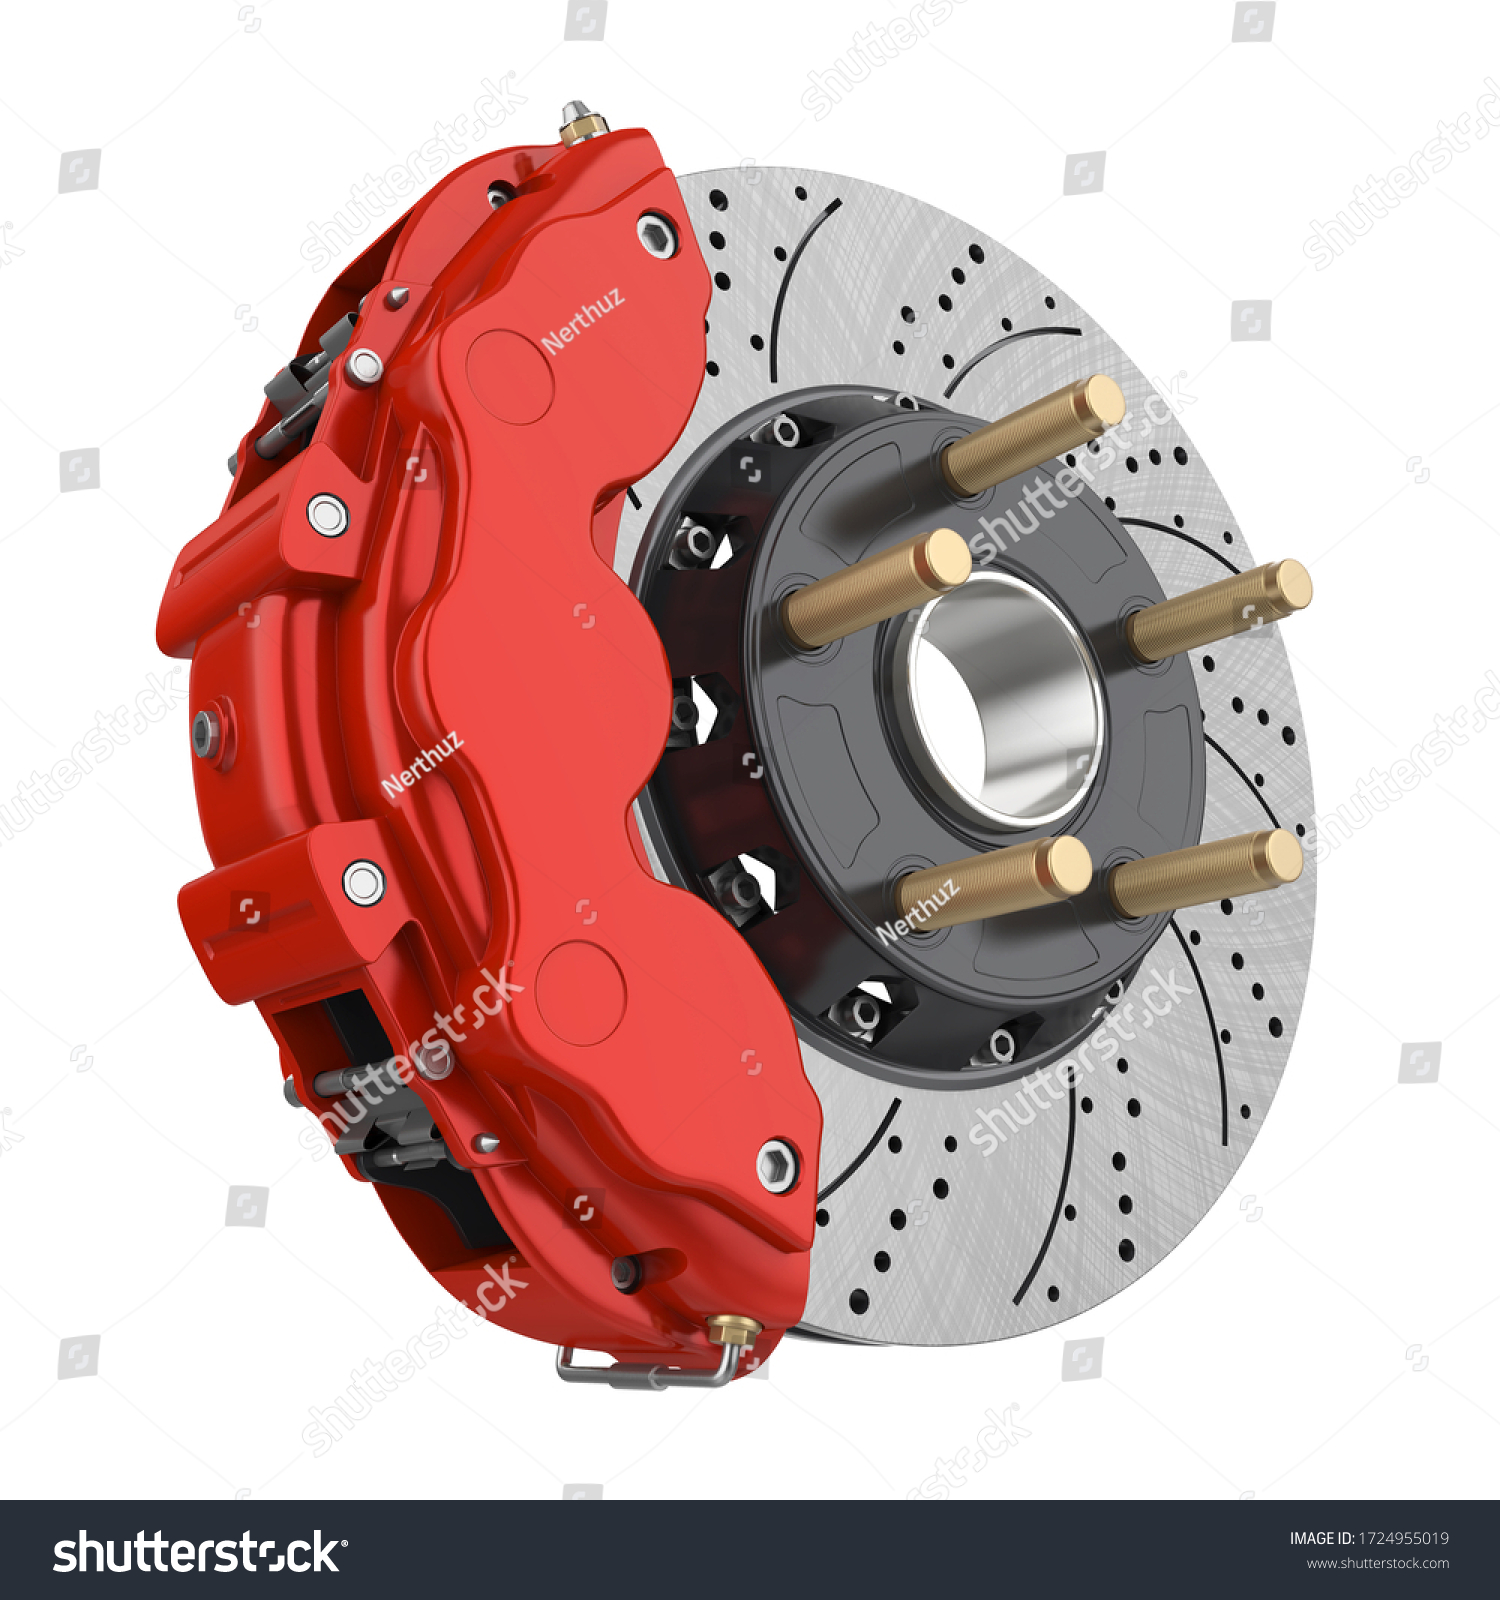 Details about   Mx1000 Red Caliper Brake Rear W/front Parts With White Brake Housing And Cable